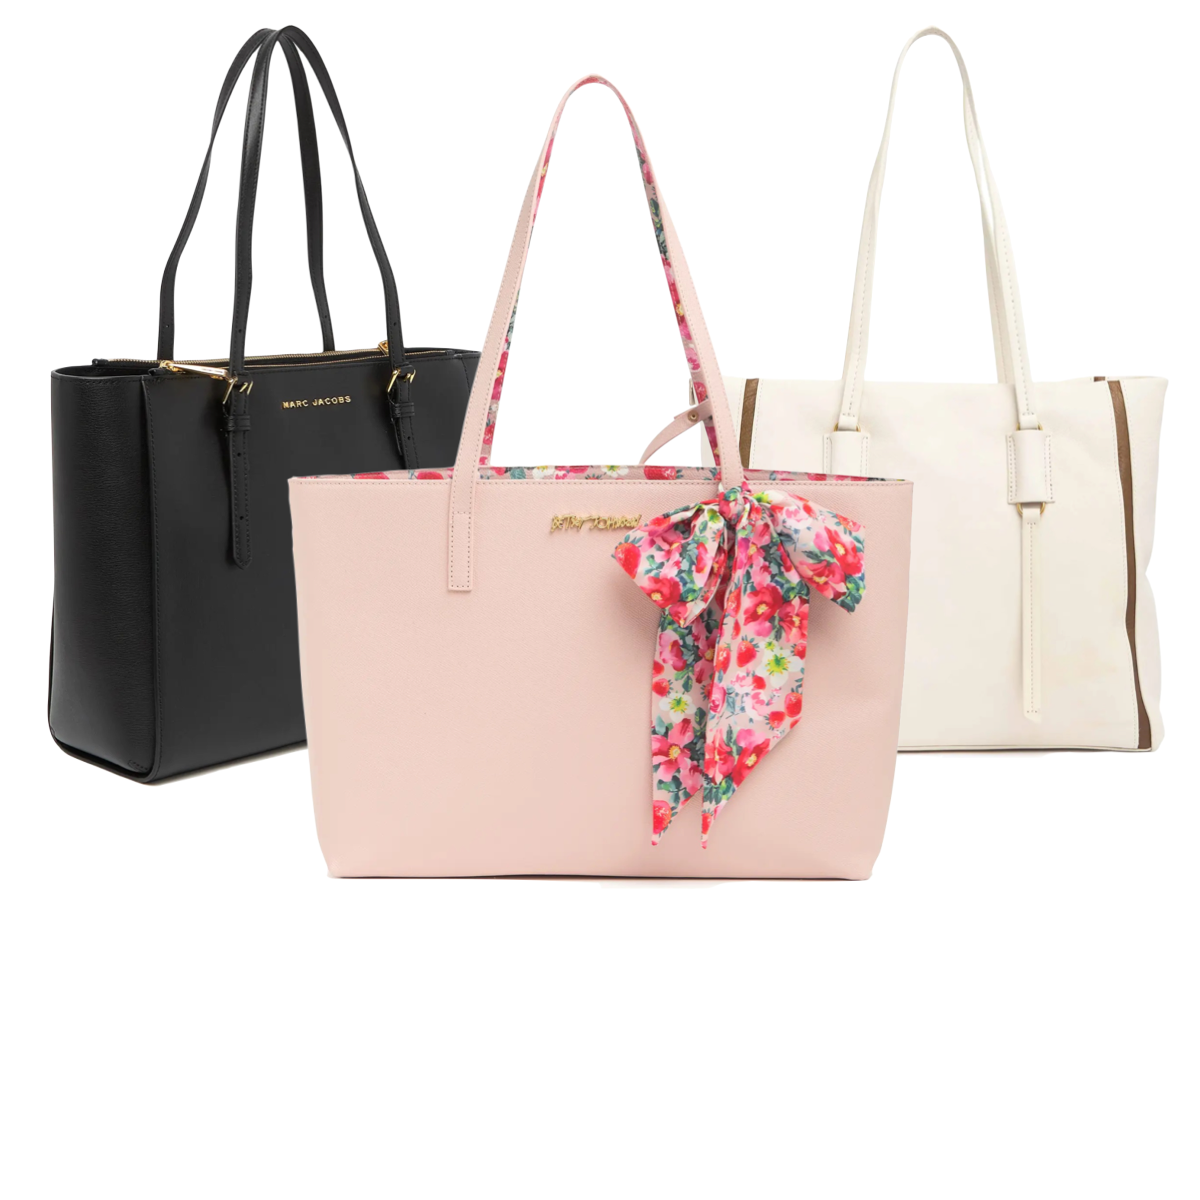 Pop into spring with up to 50% off handbags at Nordstrom Rack - CNET